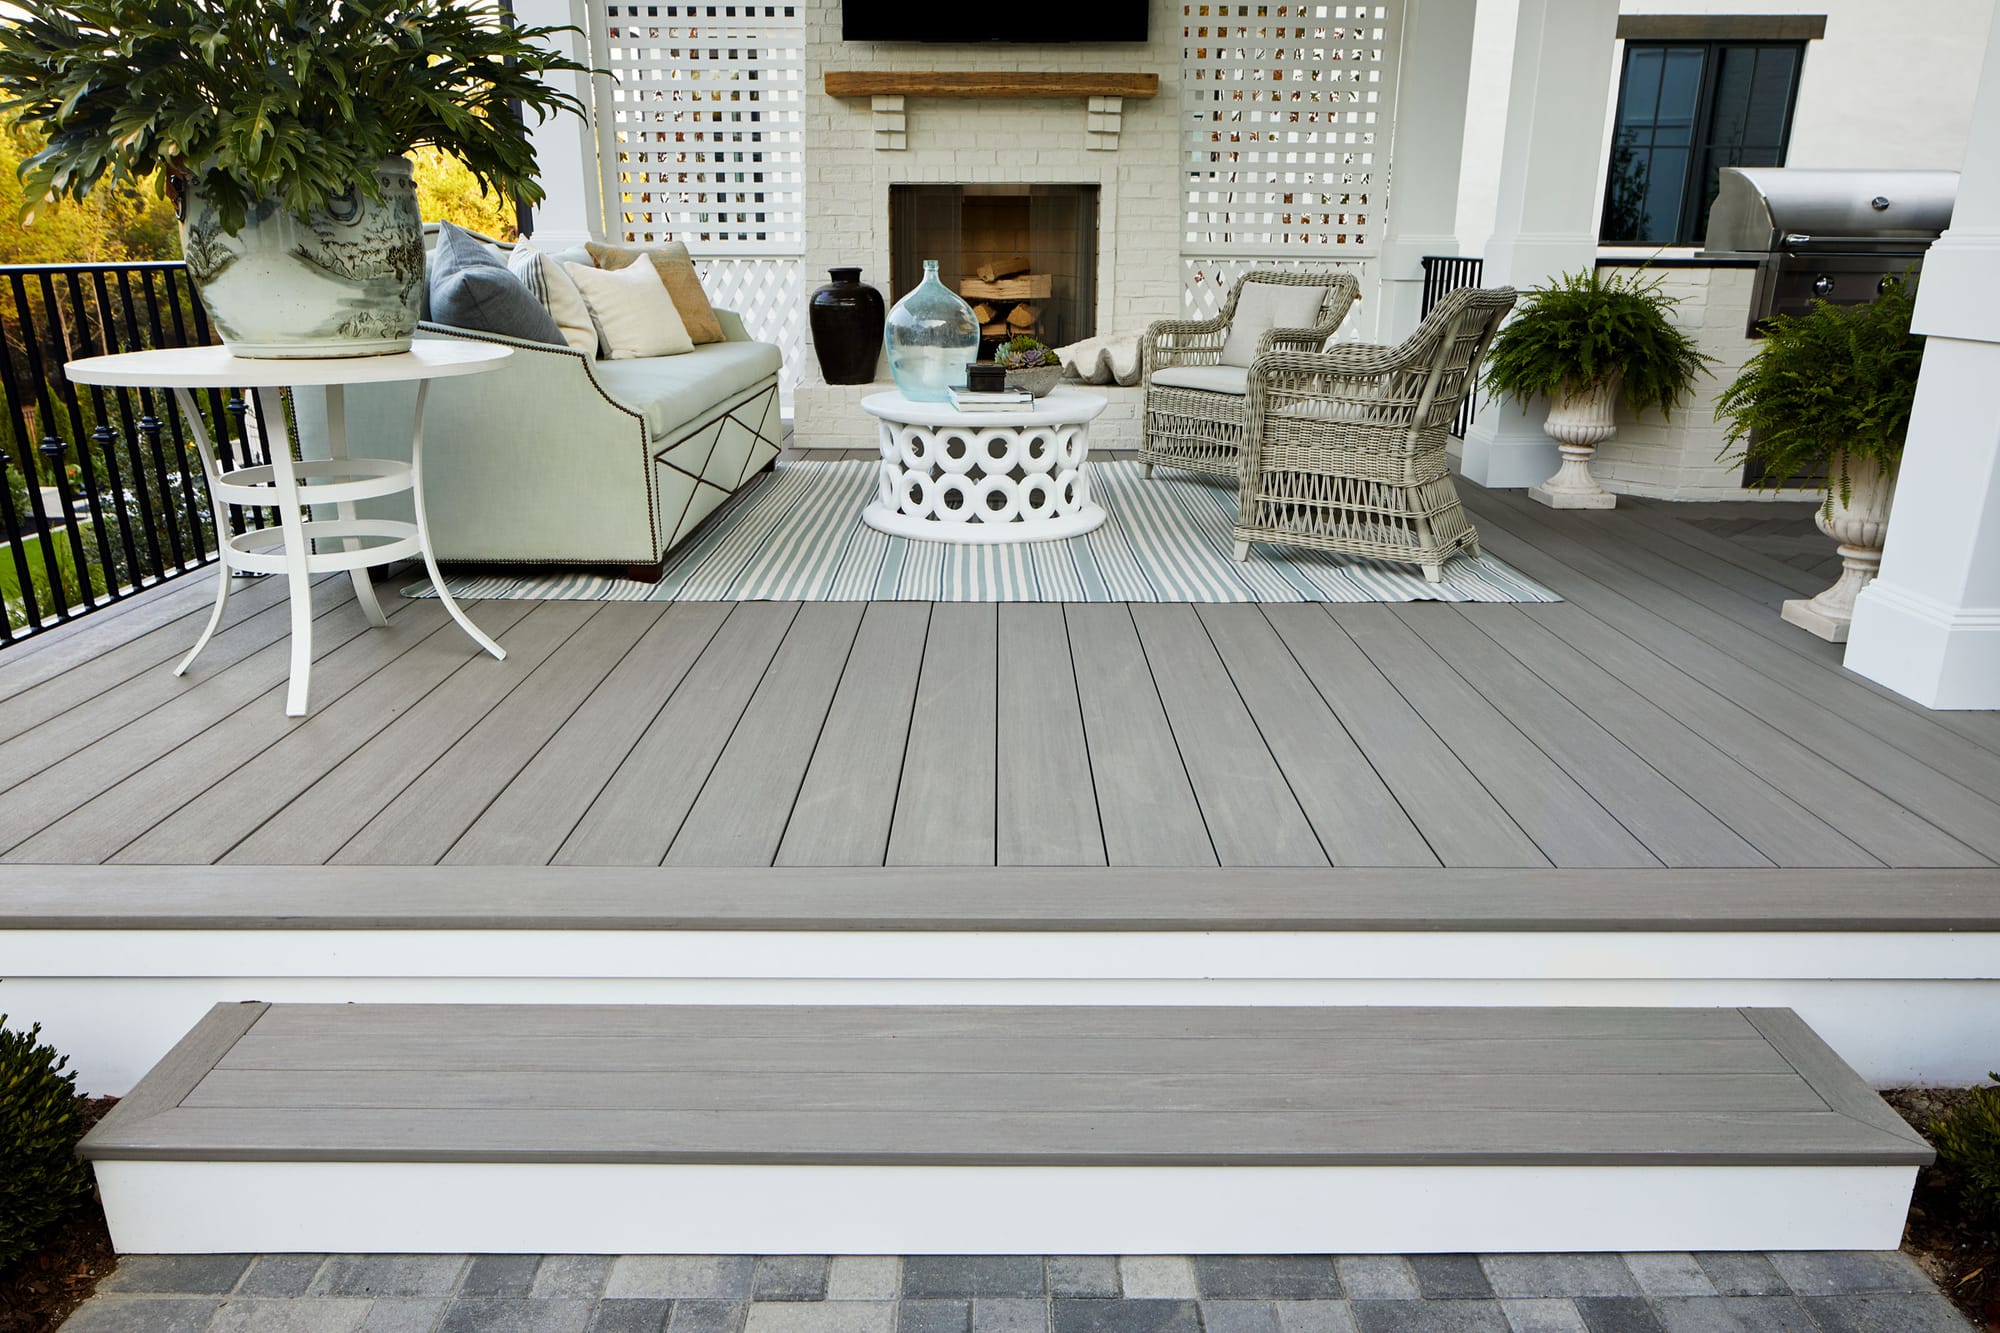 Composite decking boards - check they have codemark compliance before you buy them